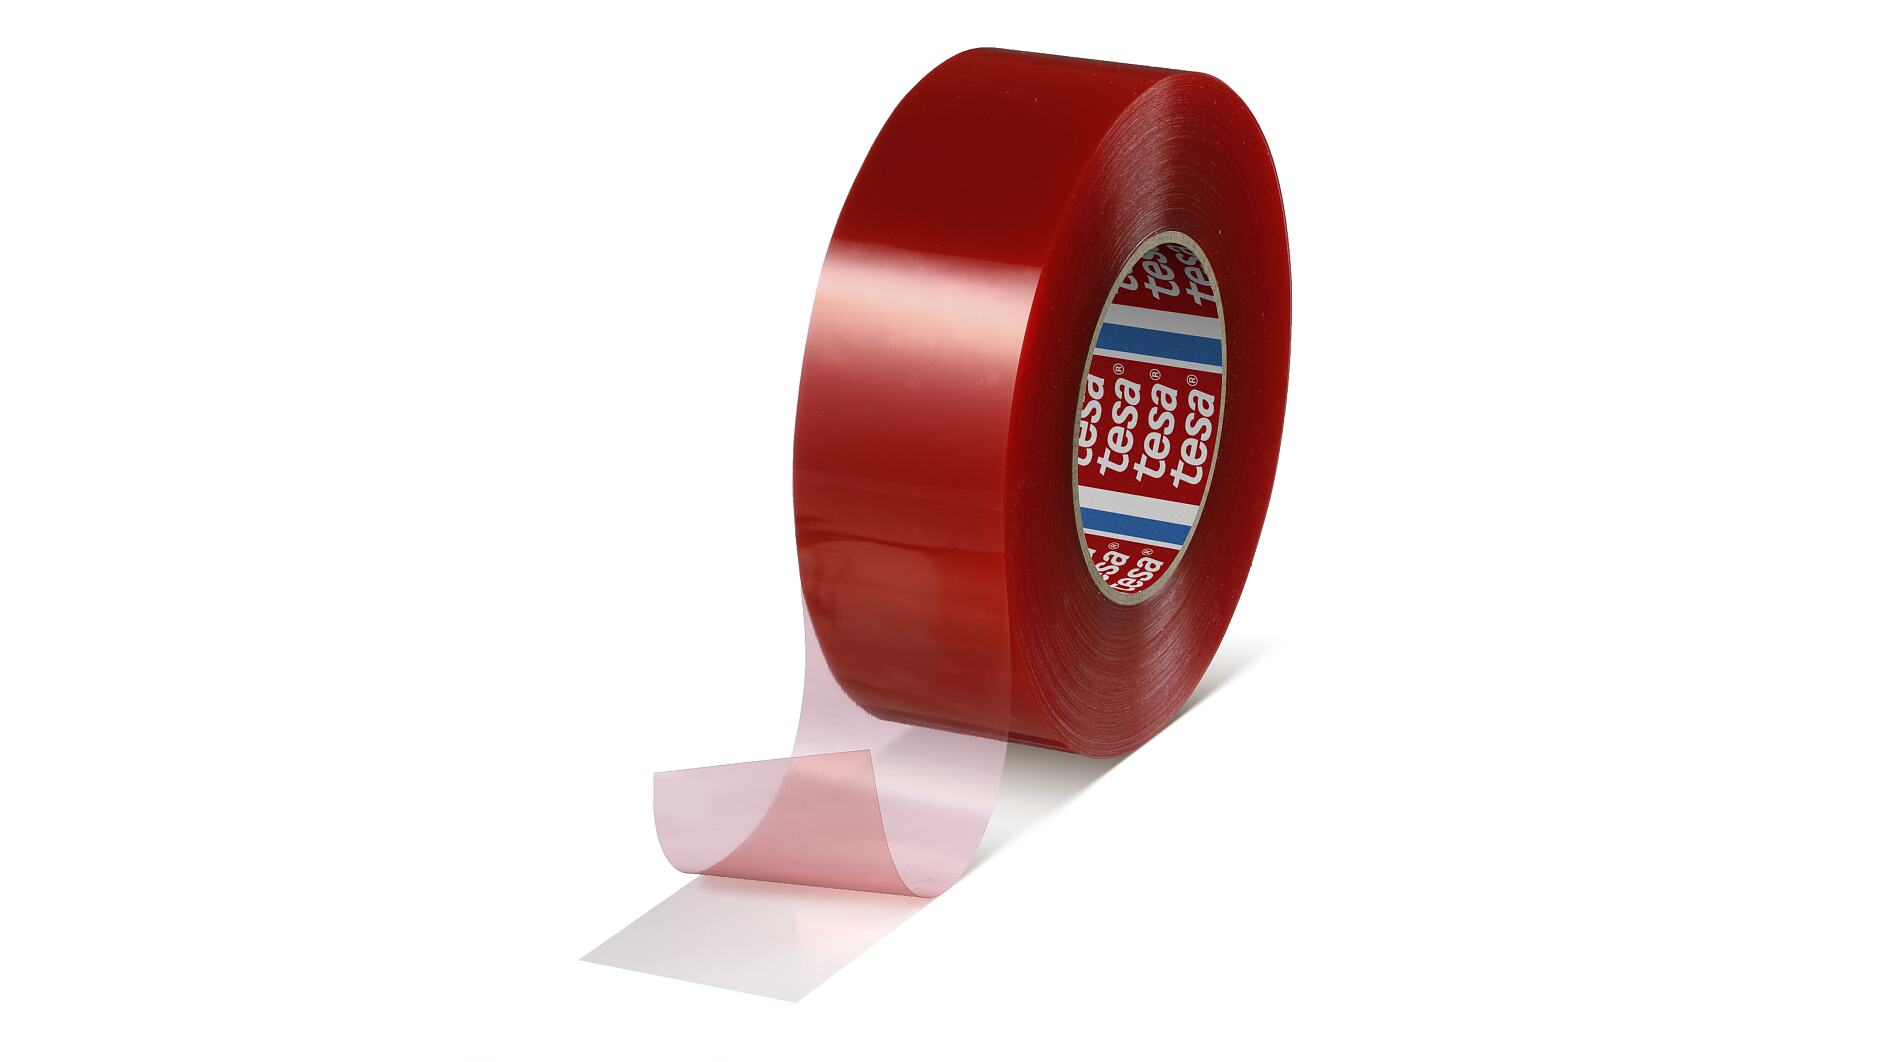 Optimum Technologies Double Sided Tape, Professional Heavy Duty